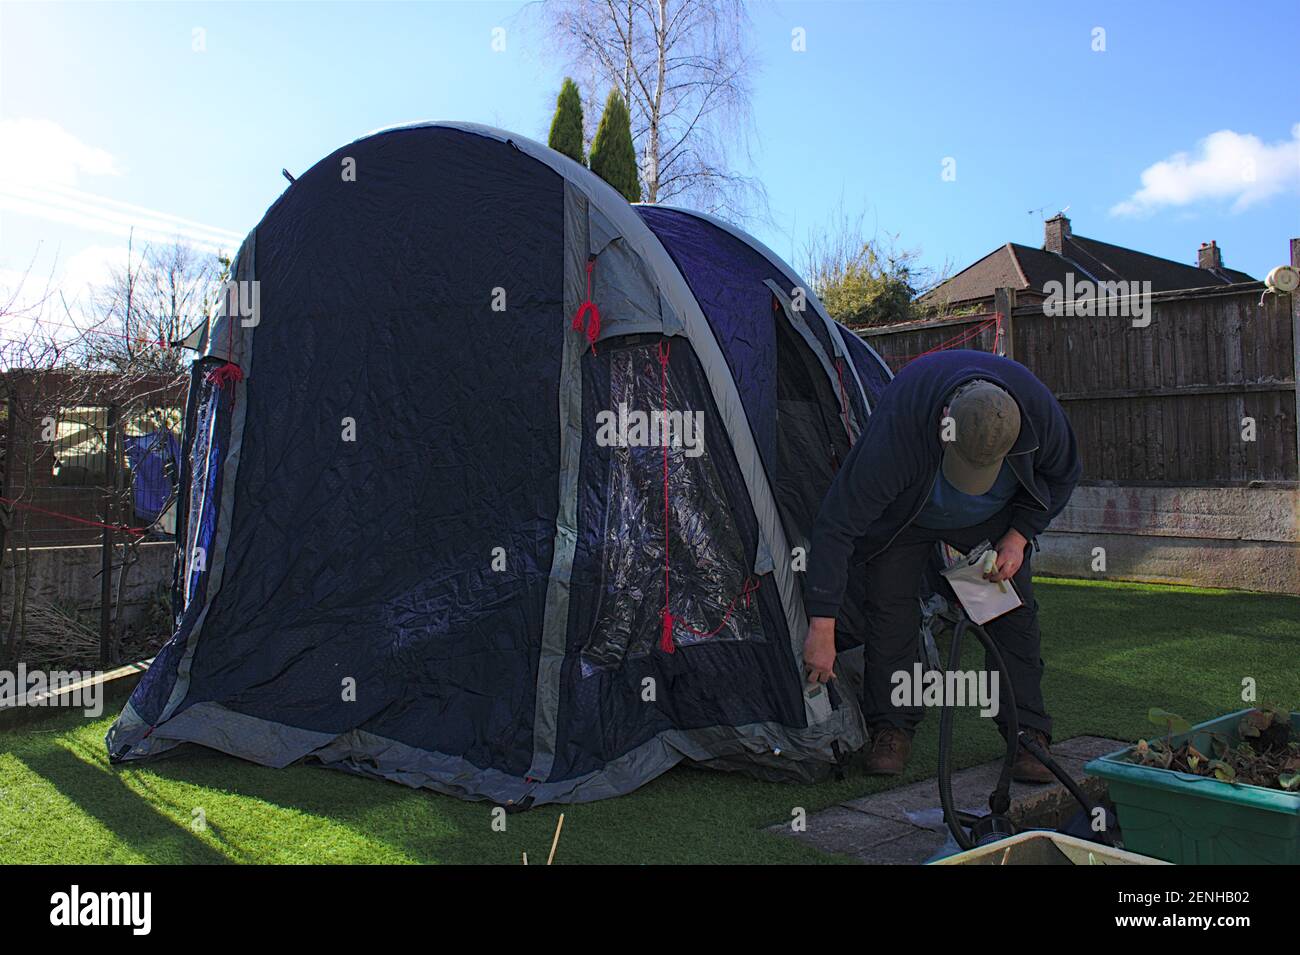 Unidentifiable man inflating a four man ten in a domestic garden, holidaying at home concept Stock Photo